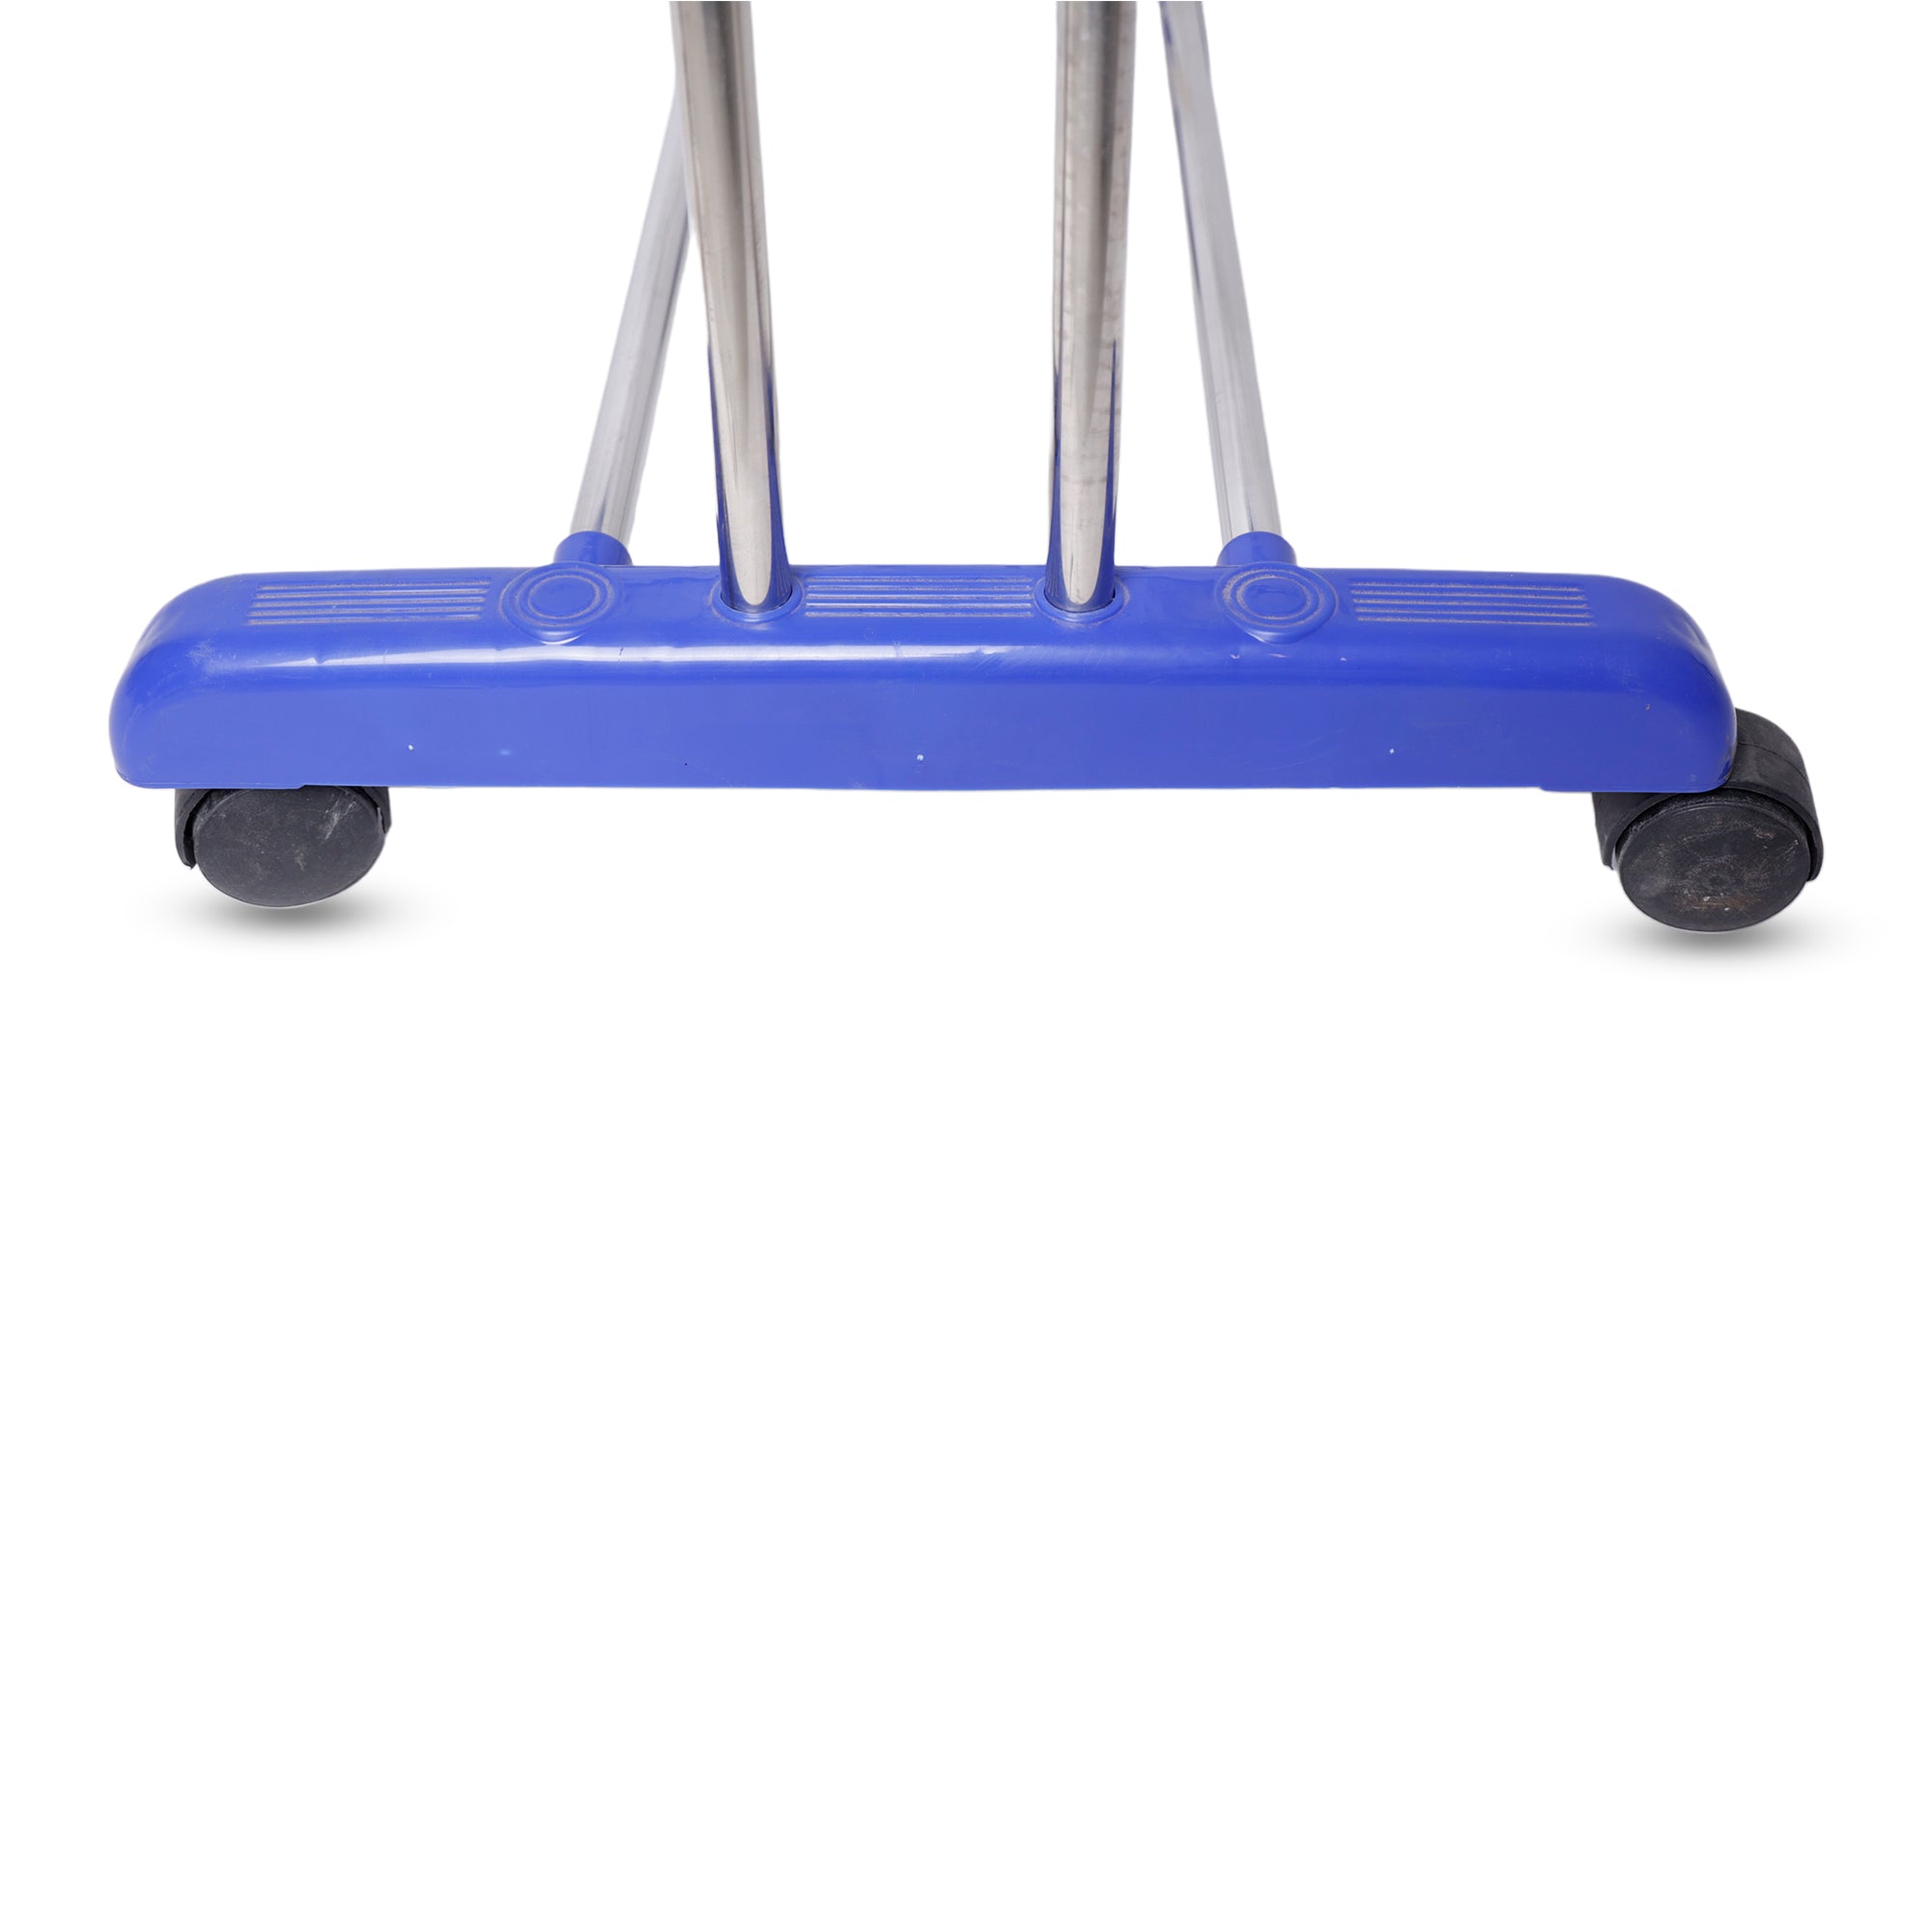 Stainless Steel Cloth Drying Stand I 2-Tier Stainless Steel I (Blue)